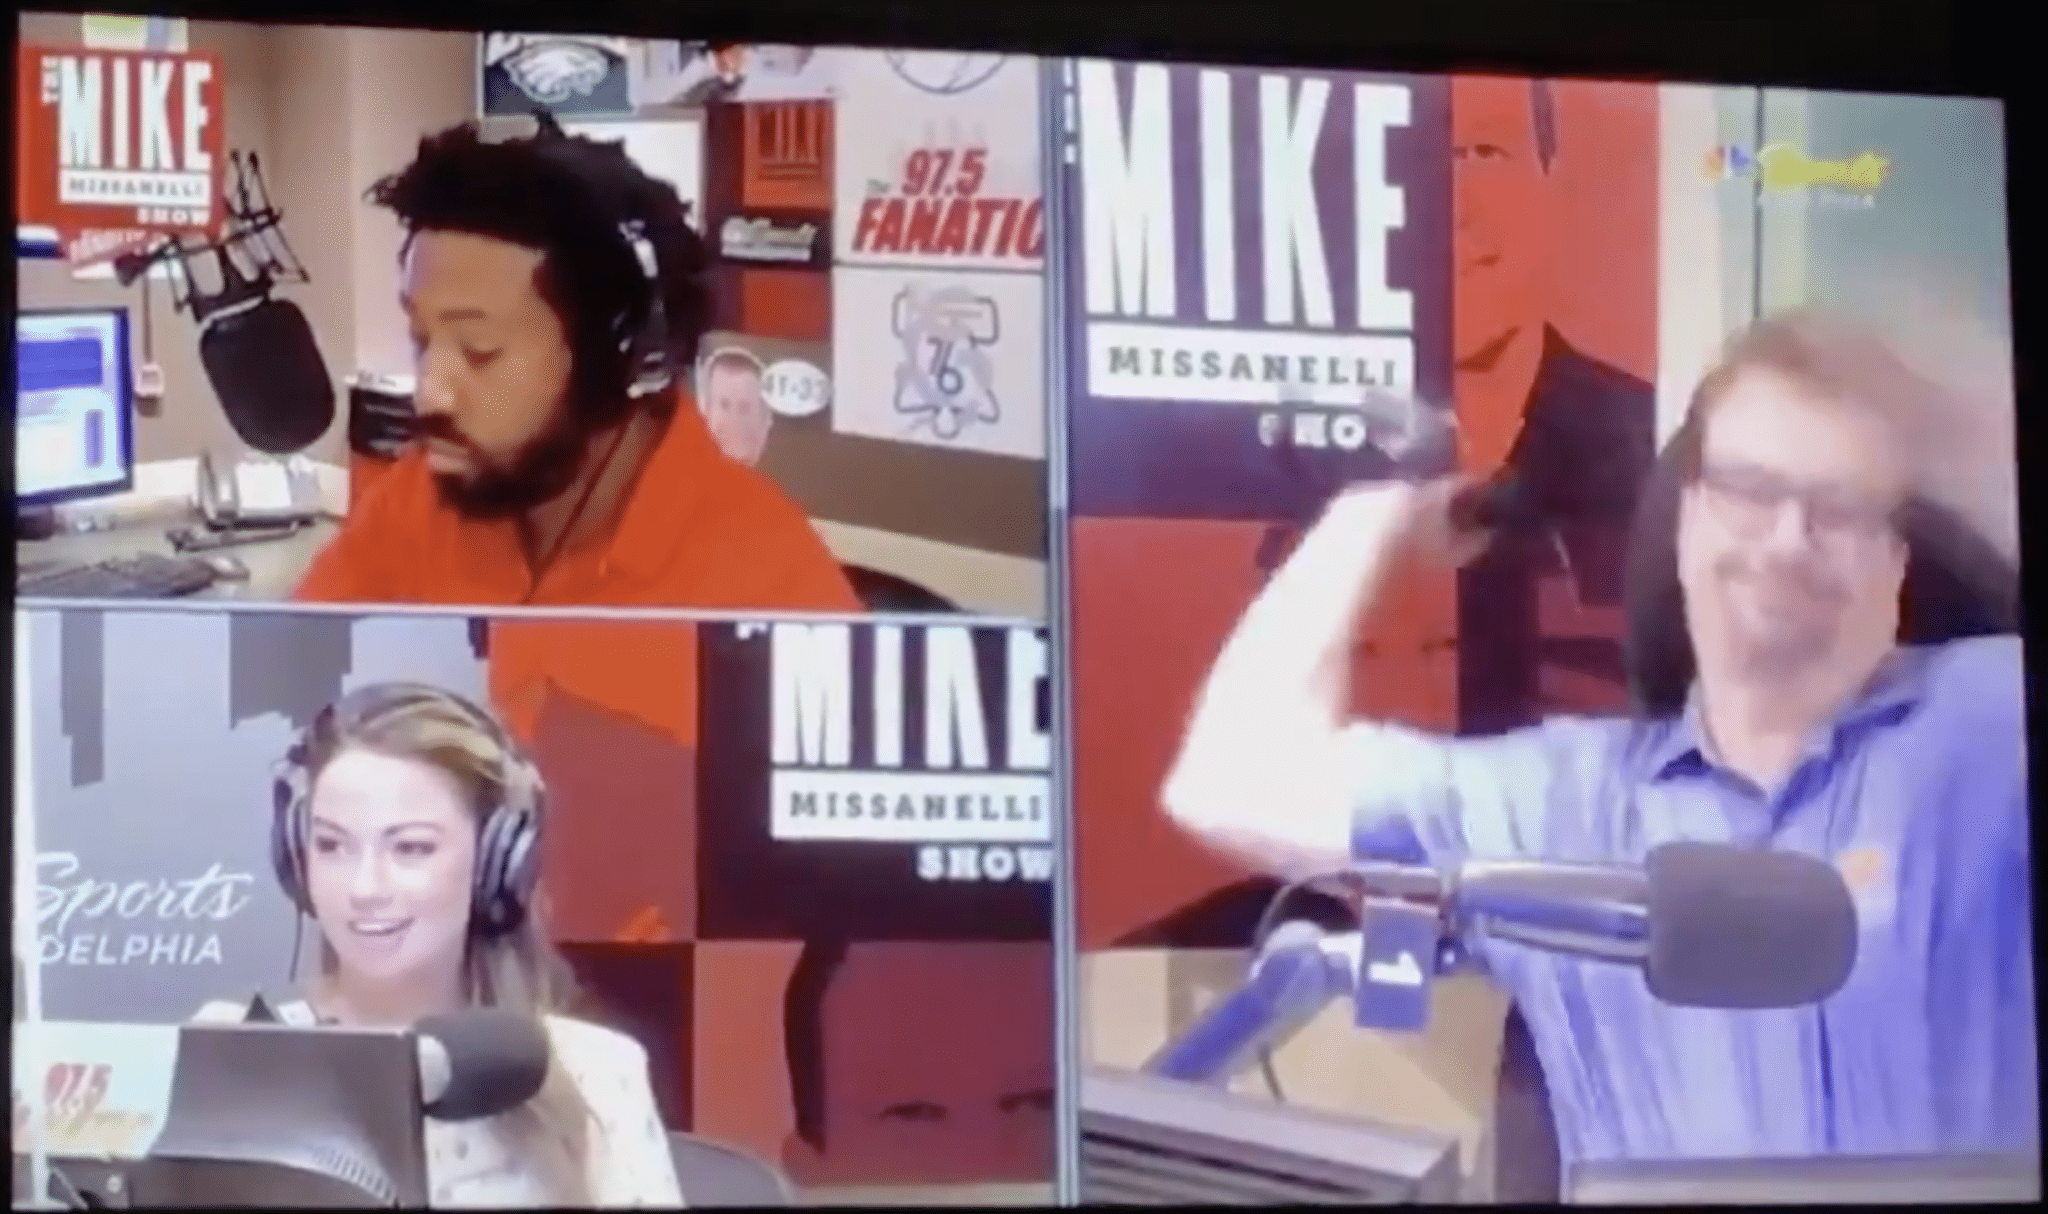 RADIO WARS: Mike Missanelli Throws Headset, Drops F-Bomb on Producer